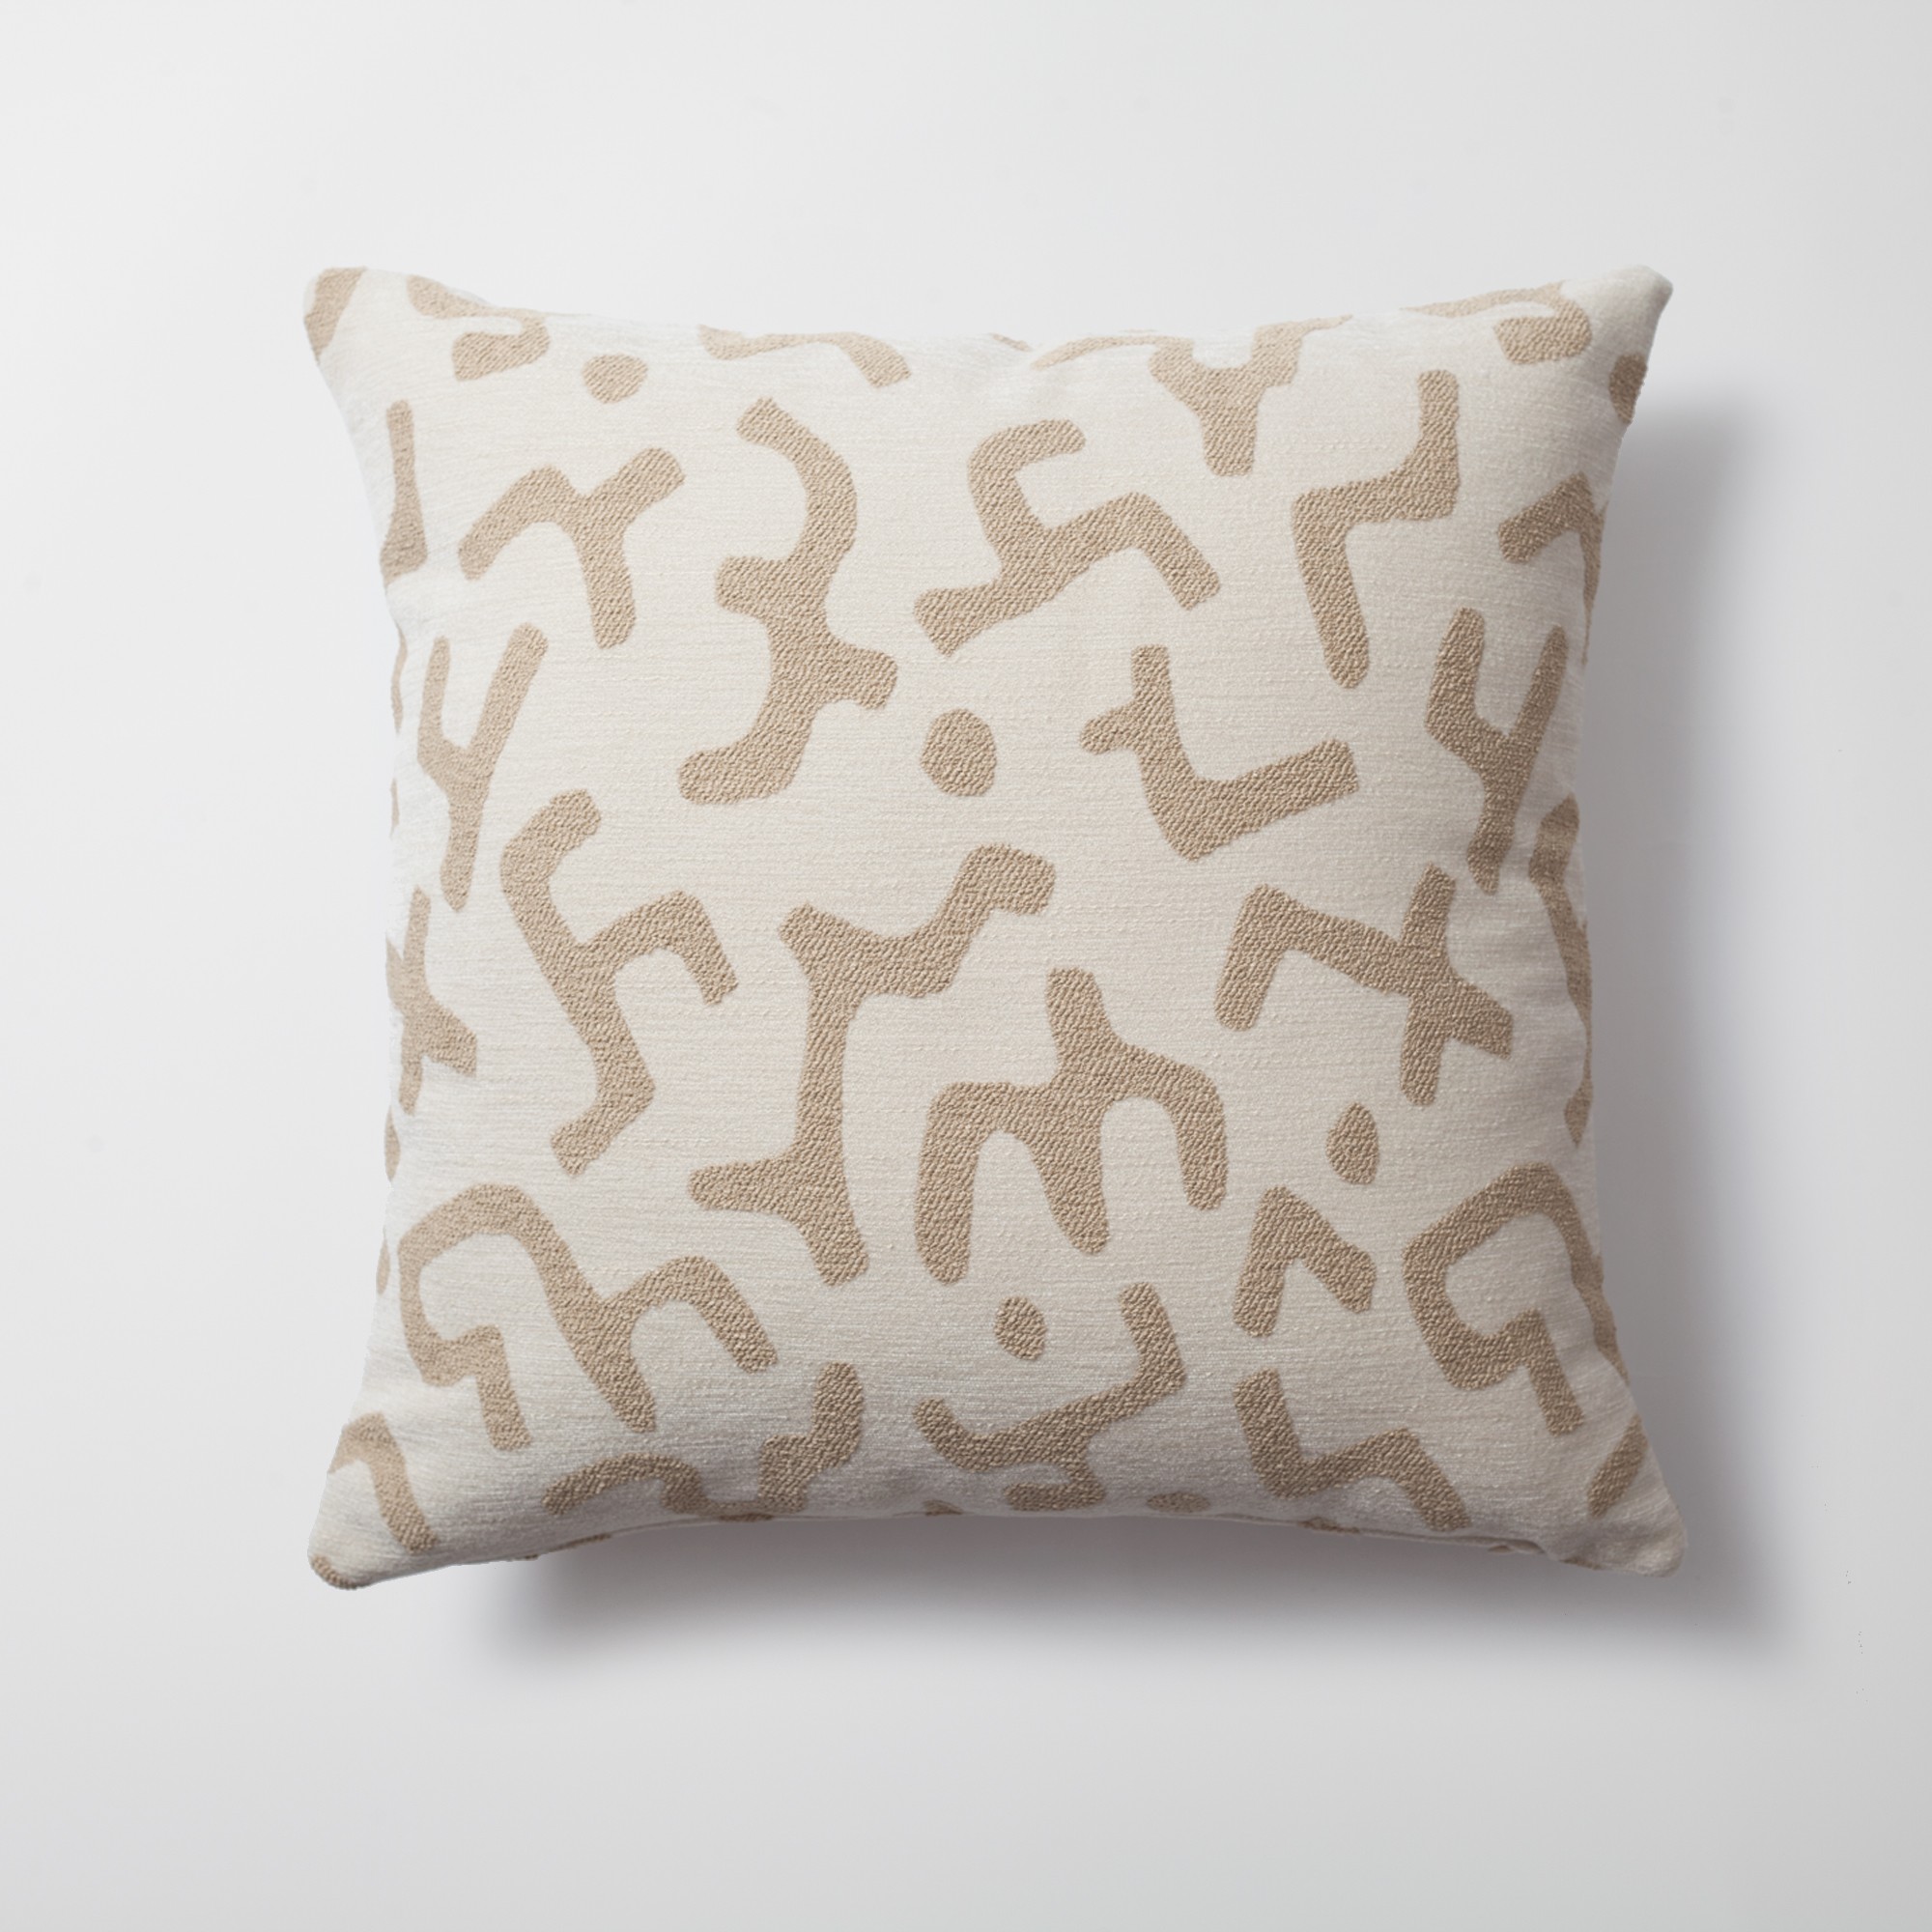 "Nandos" - Maze Patterned 20x20 Inch Pillow - Cream (Cover Only)